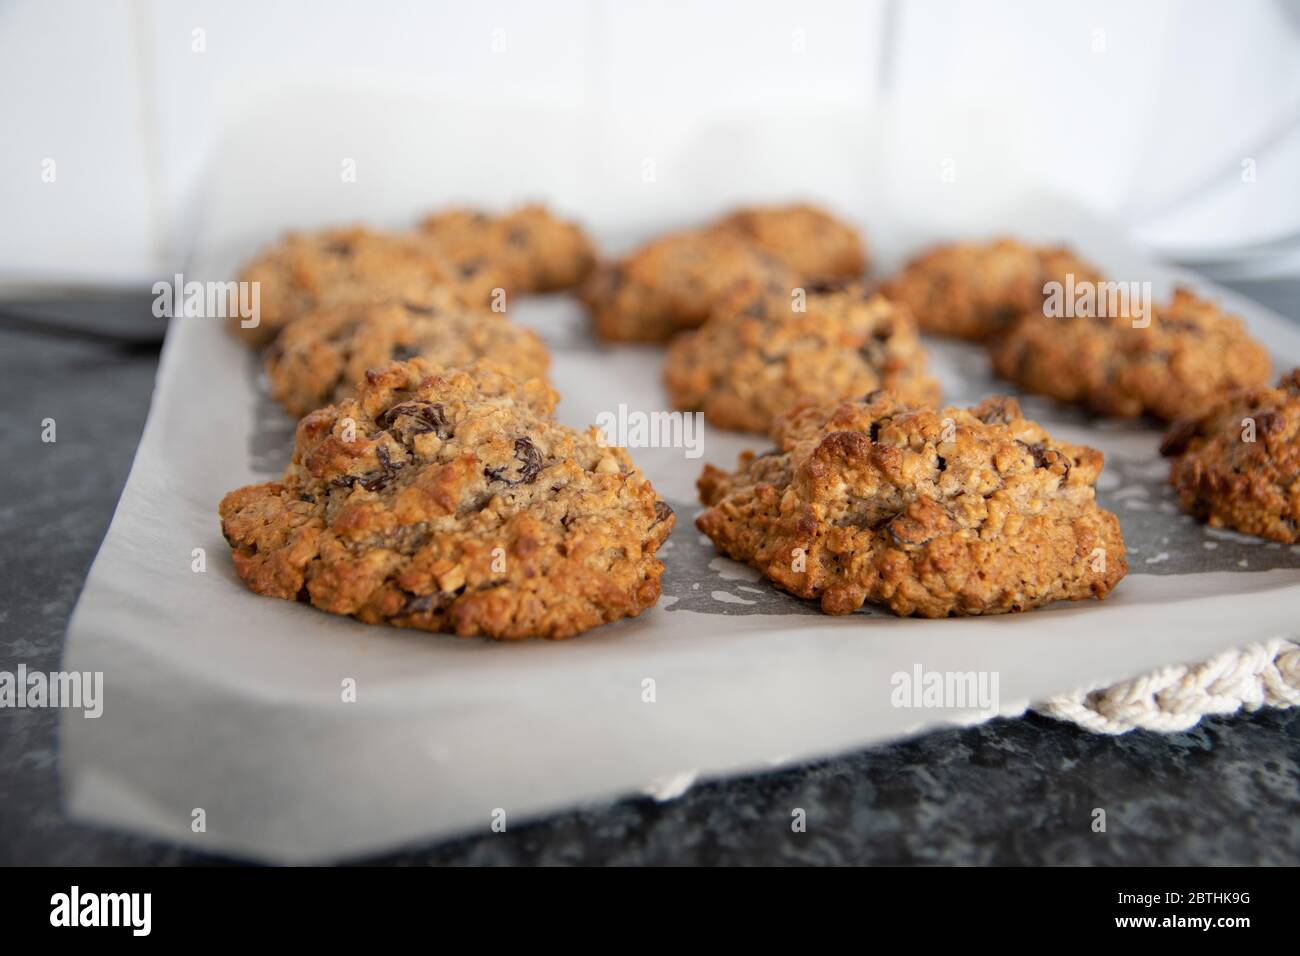 A fresh batch of oven baked oat biscuits and cookies with raisins Stock Photo